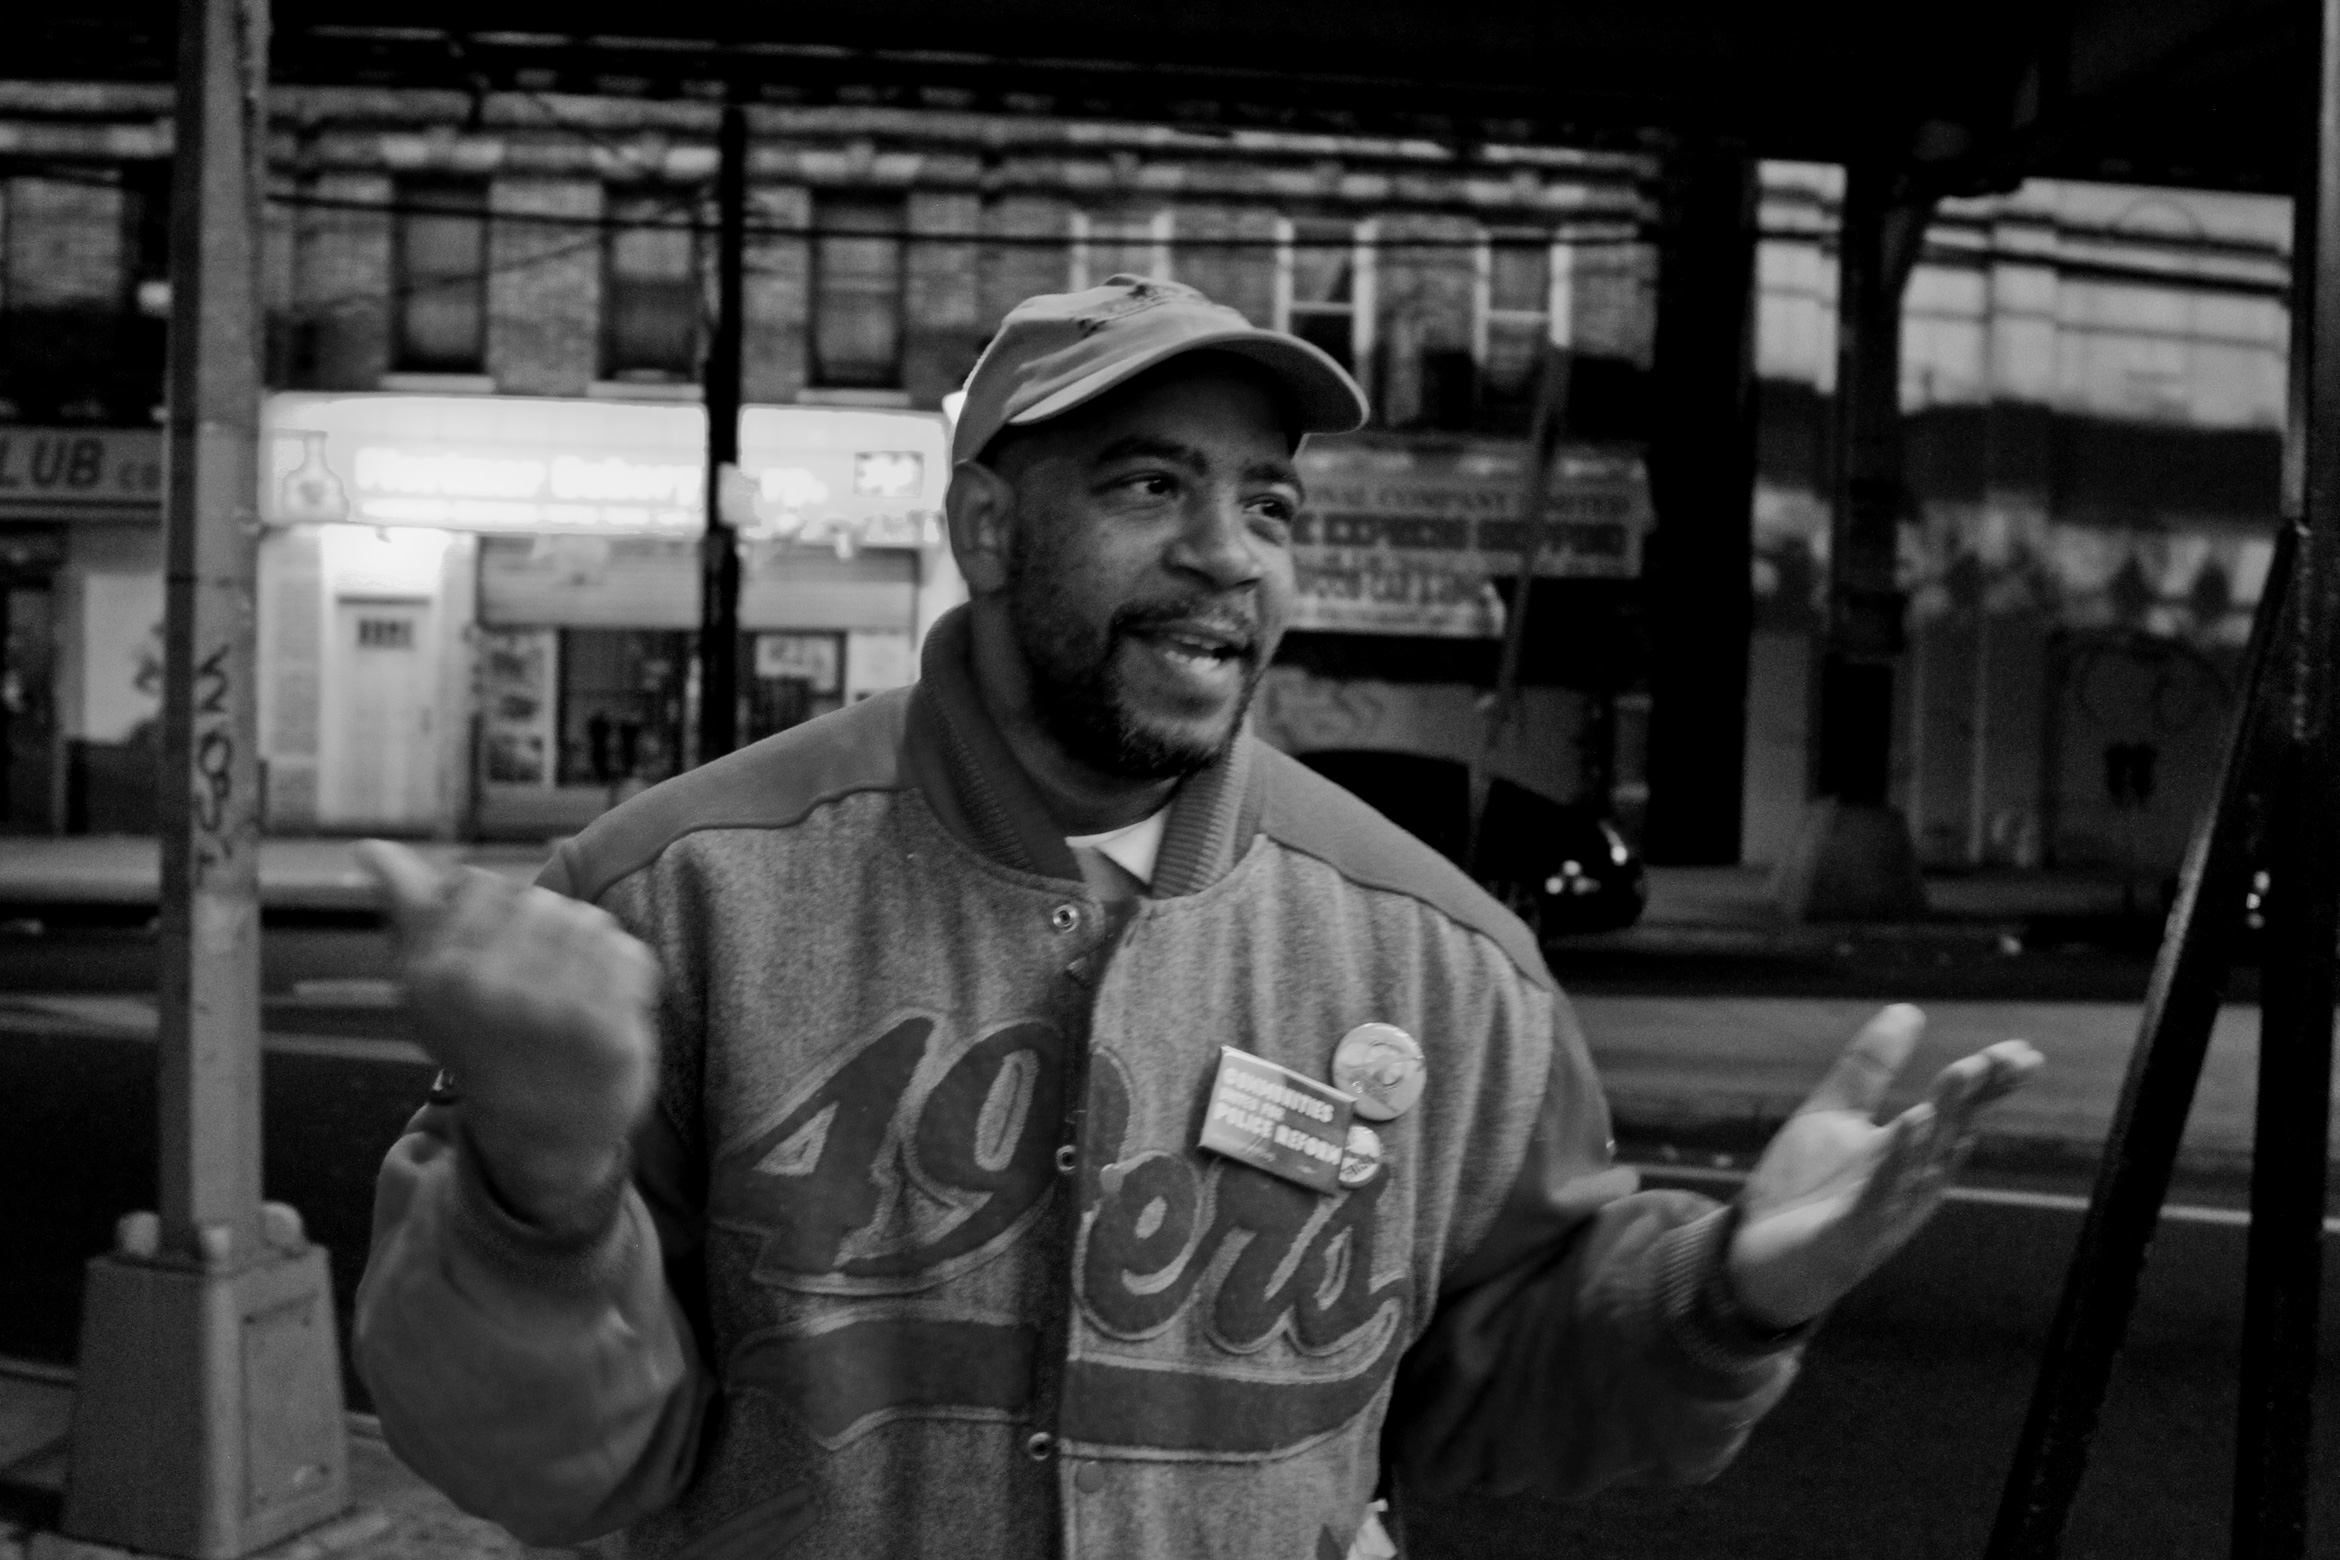 street-poet-new-york-nyc-times-up